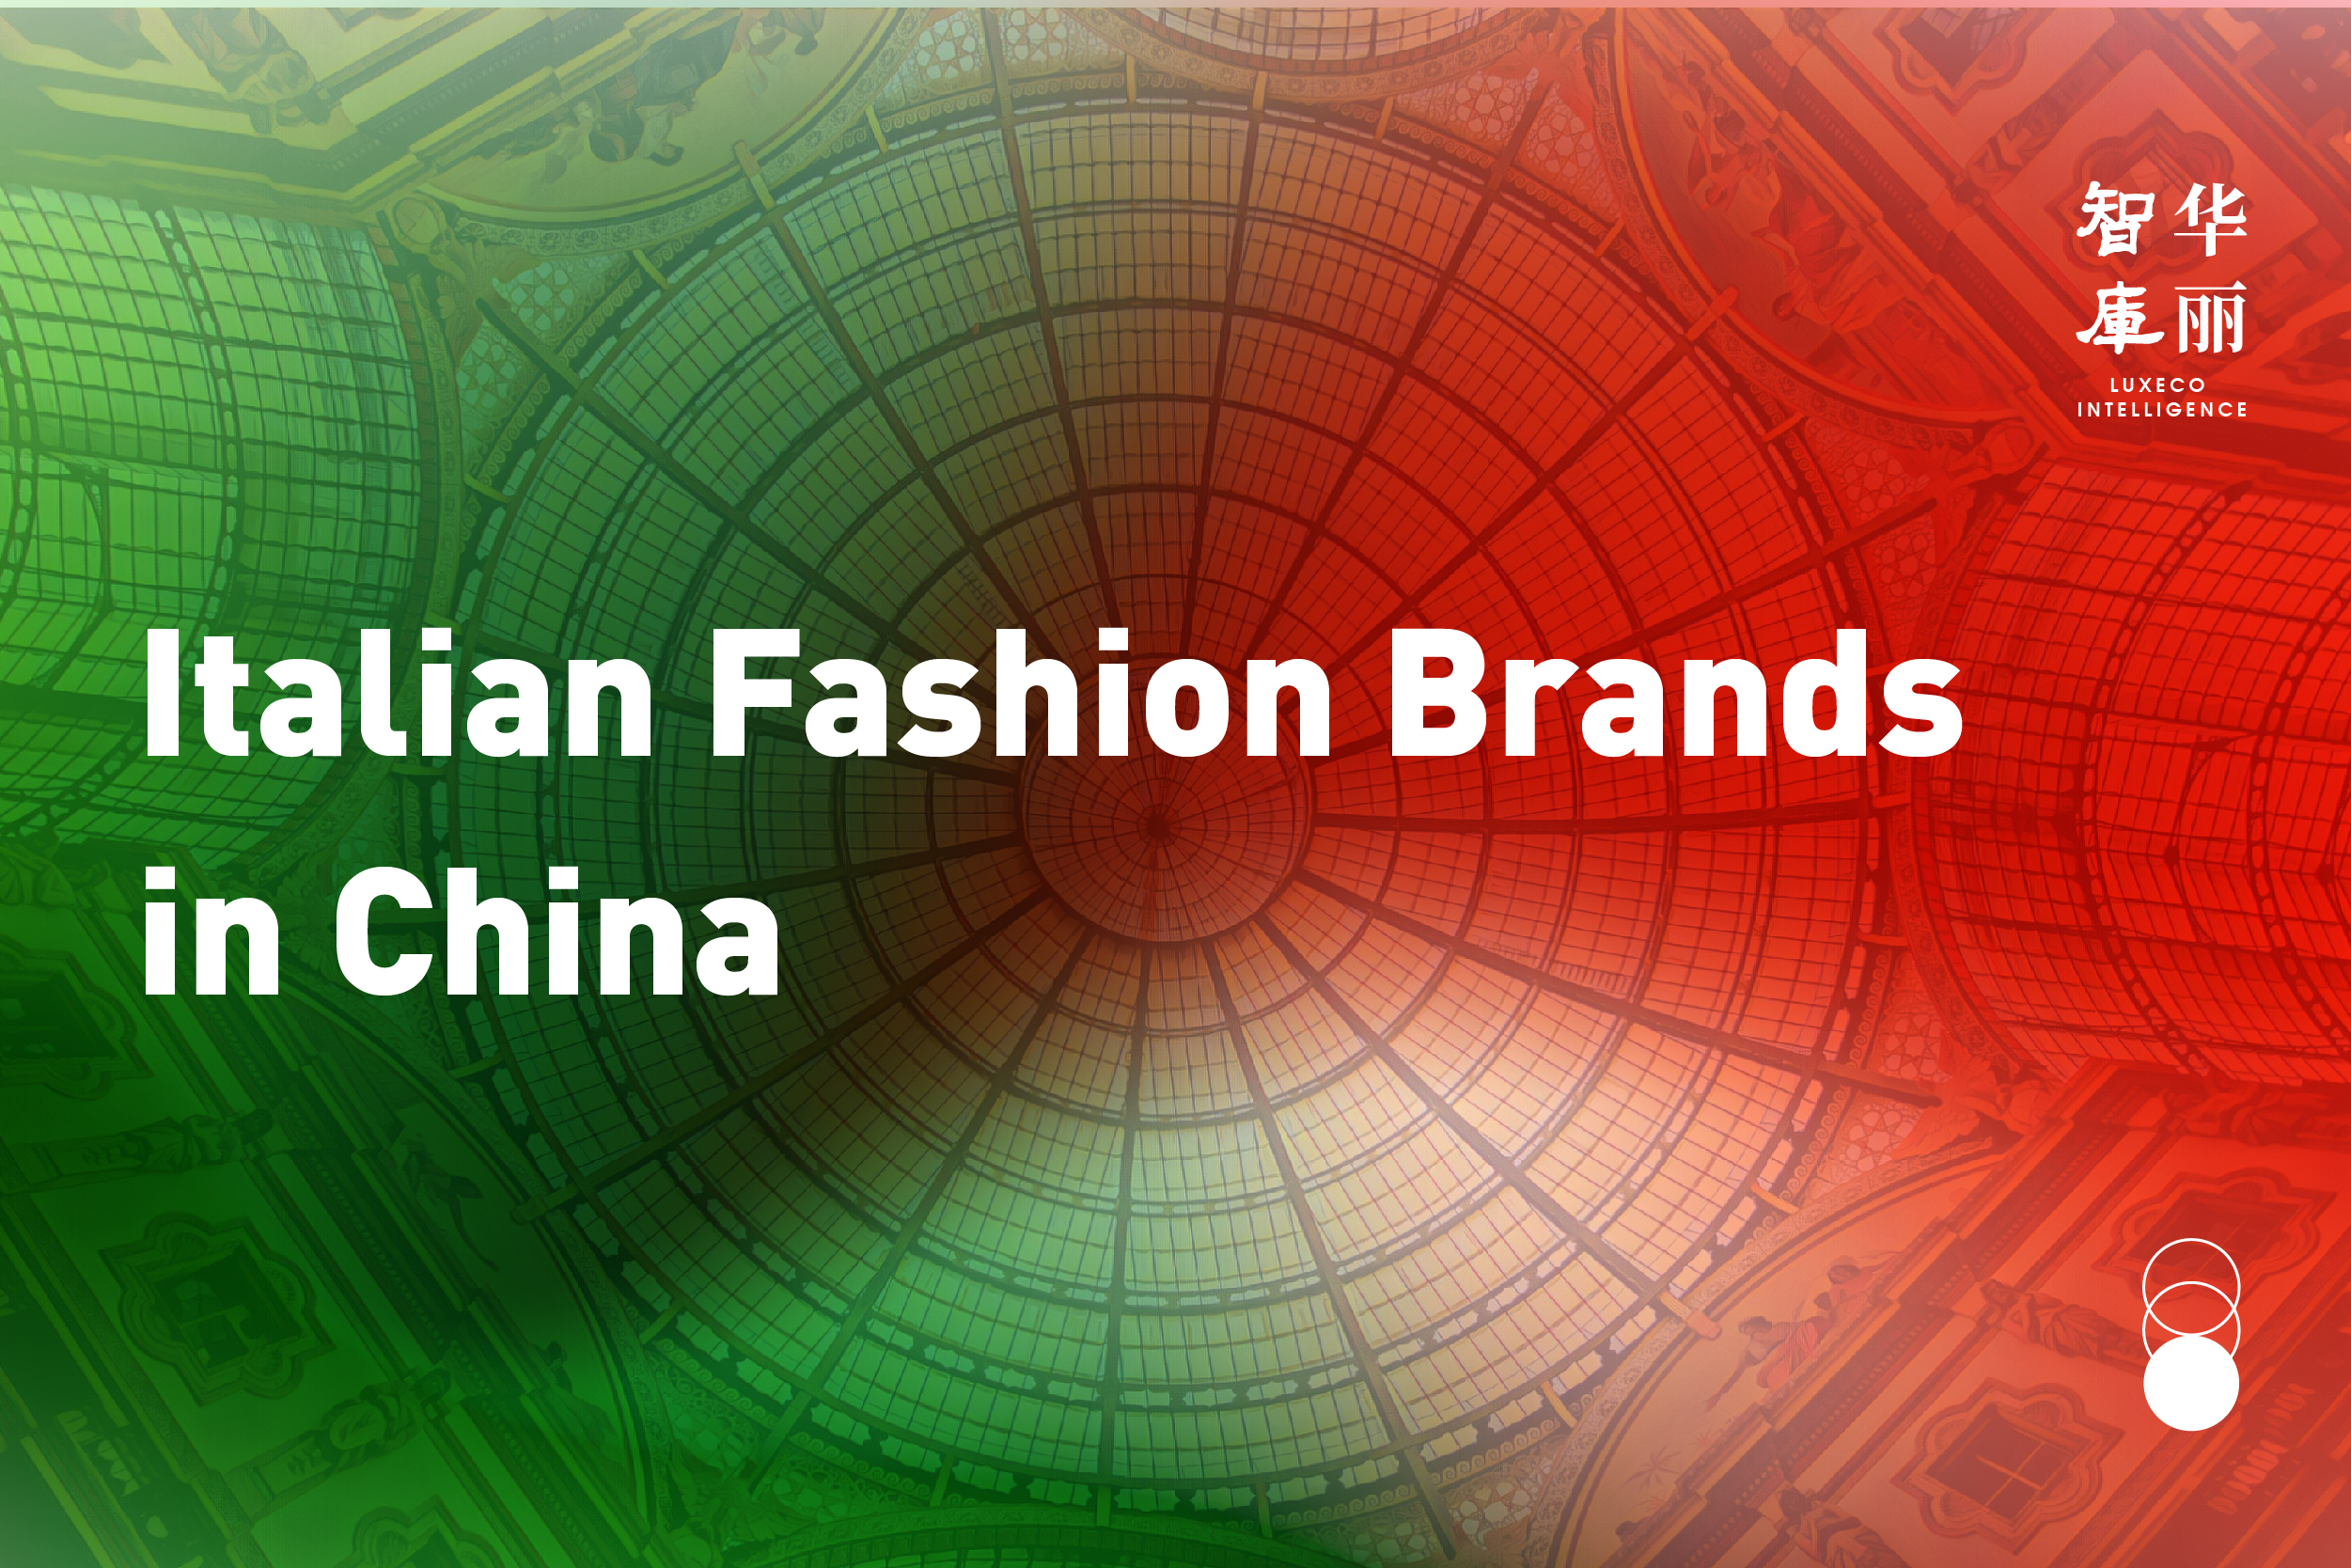 “Italian Fashion Brands in China Report” Available Now!